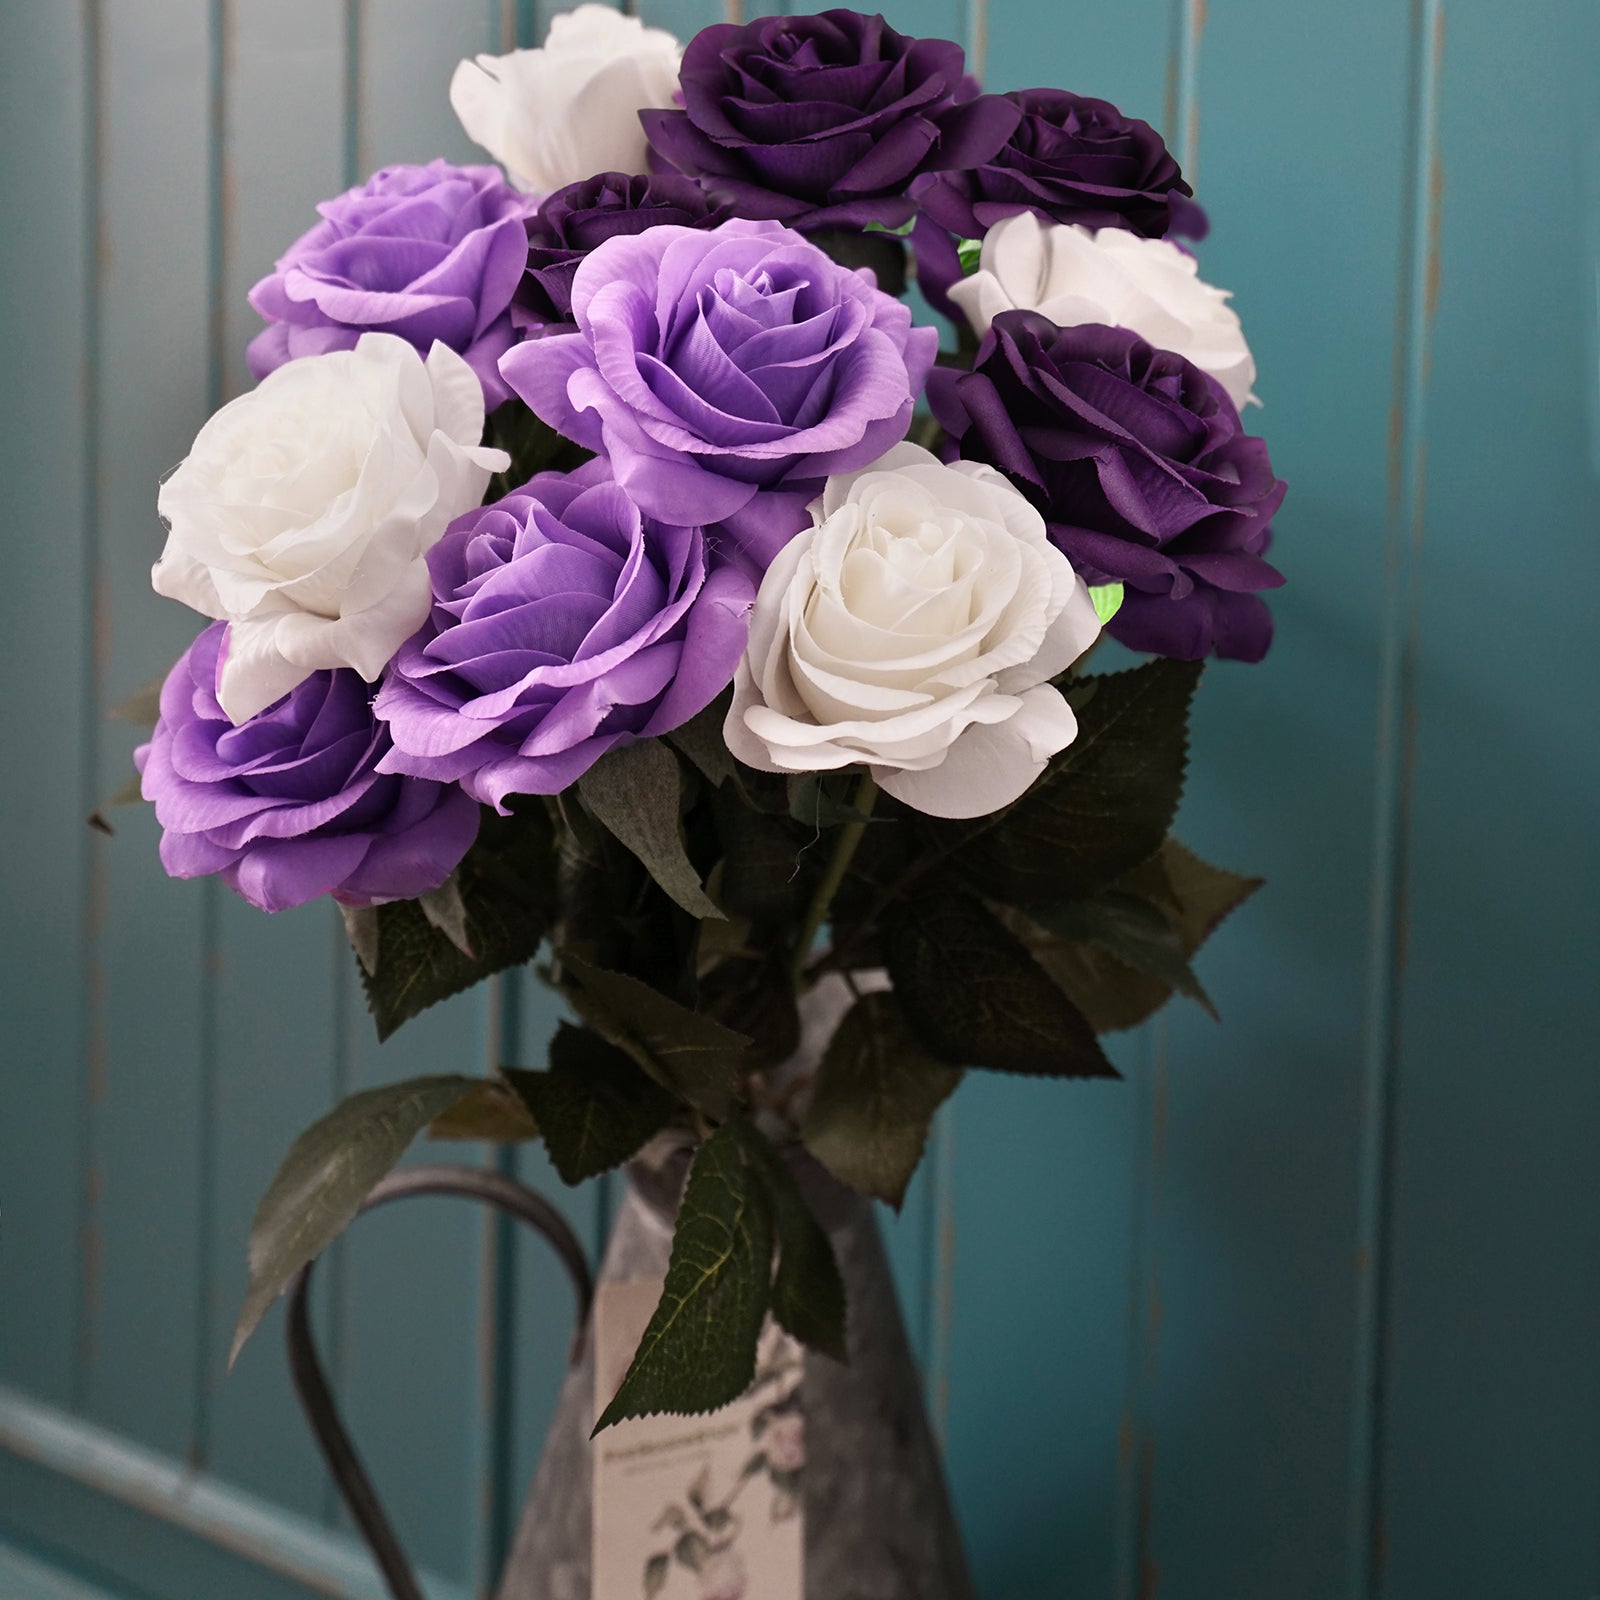 Real Touch 12 Stems Dark Purple | White Mix Silk Artificial Roses Flowers ‘Petals Feel and Look like Fresh Roses'